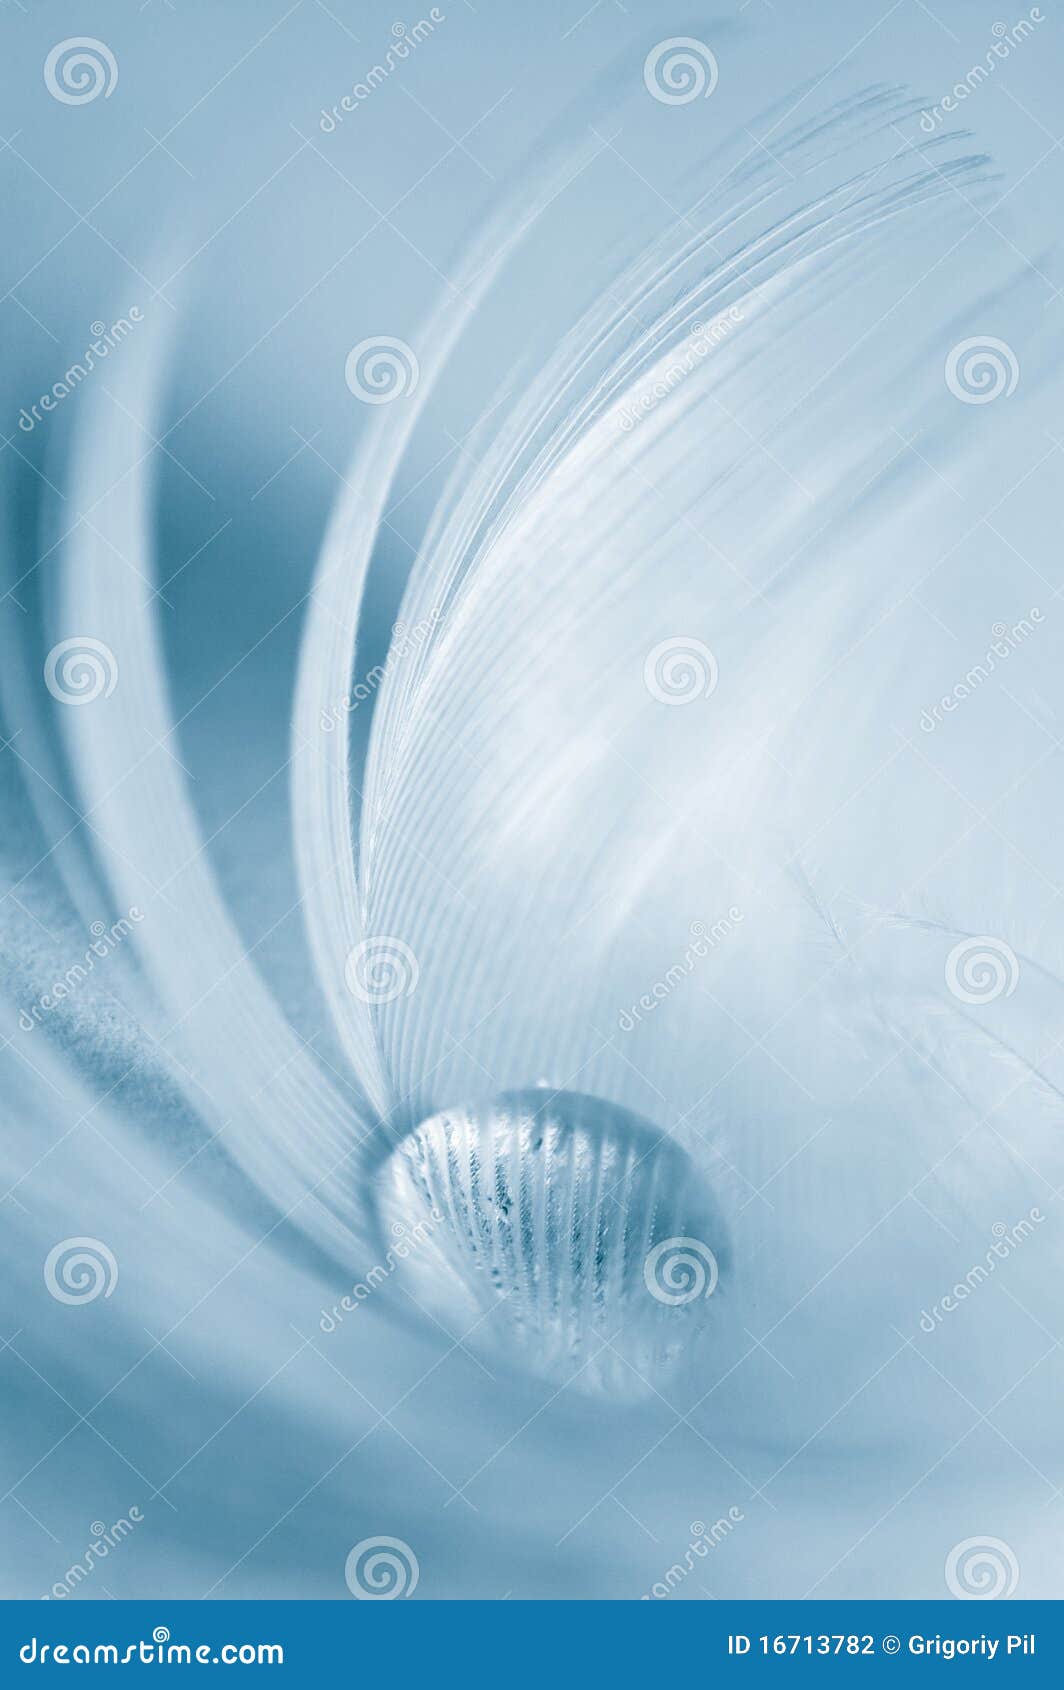 abstract cleanness background.